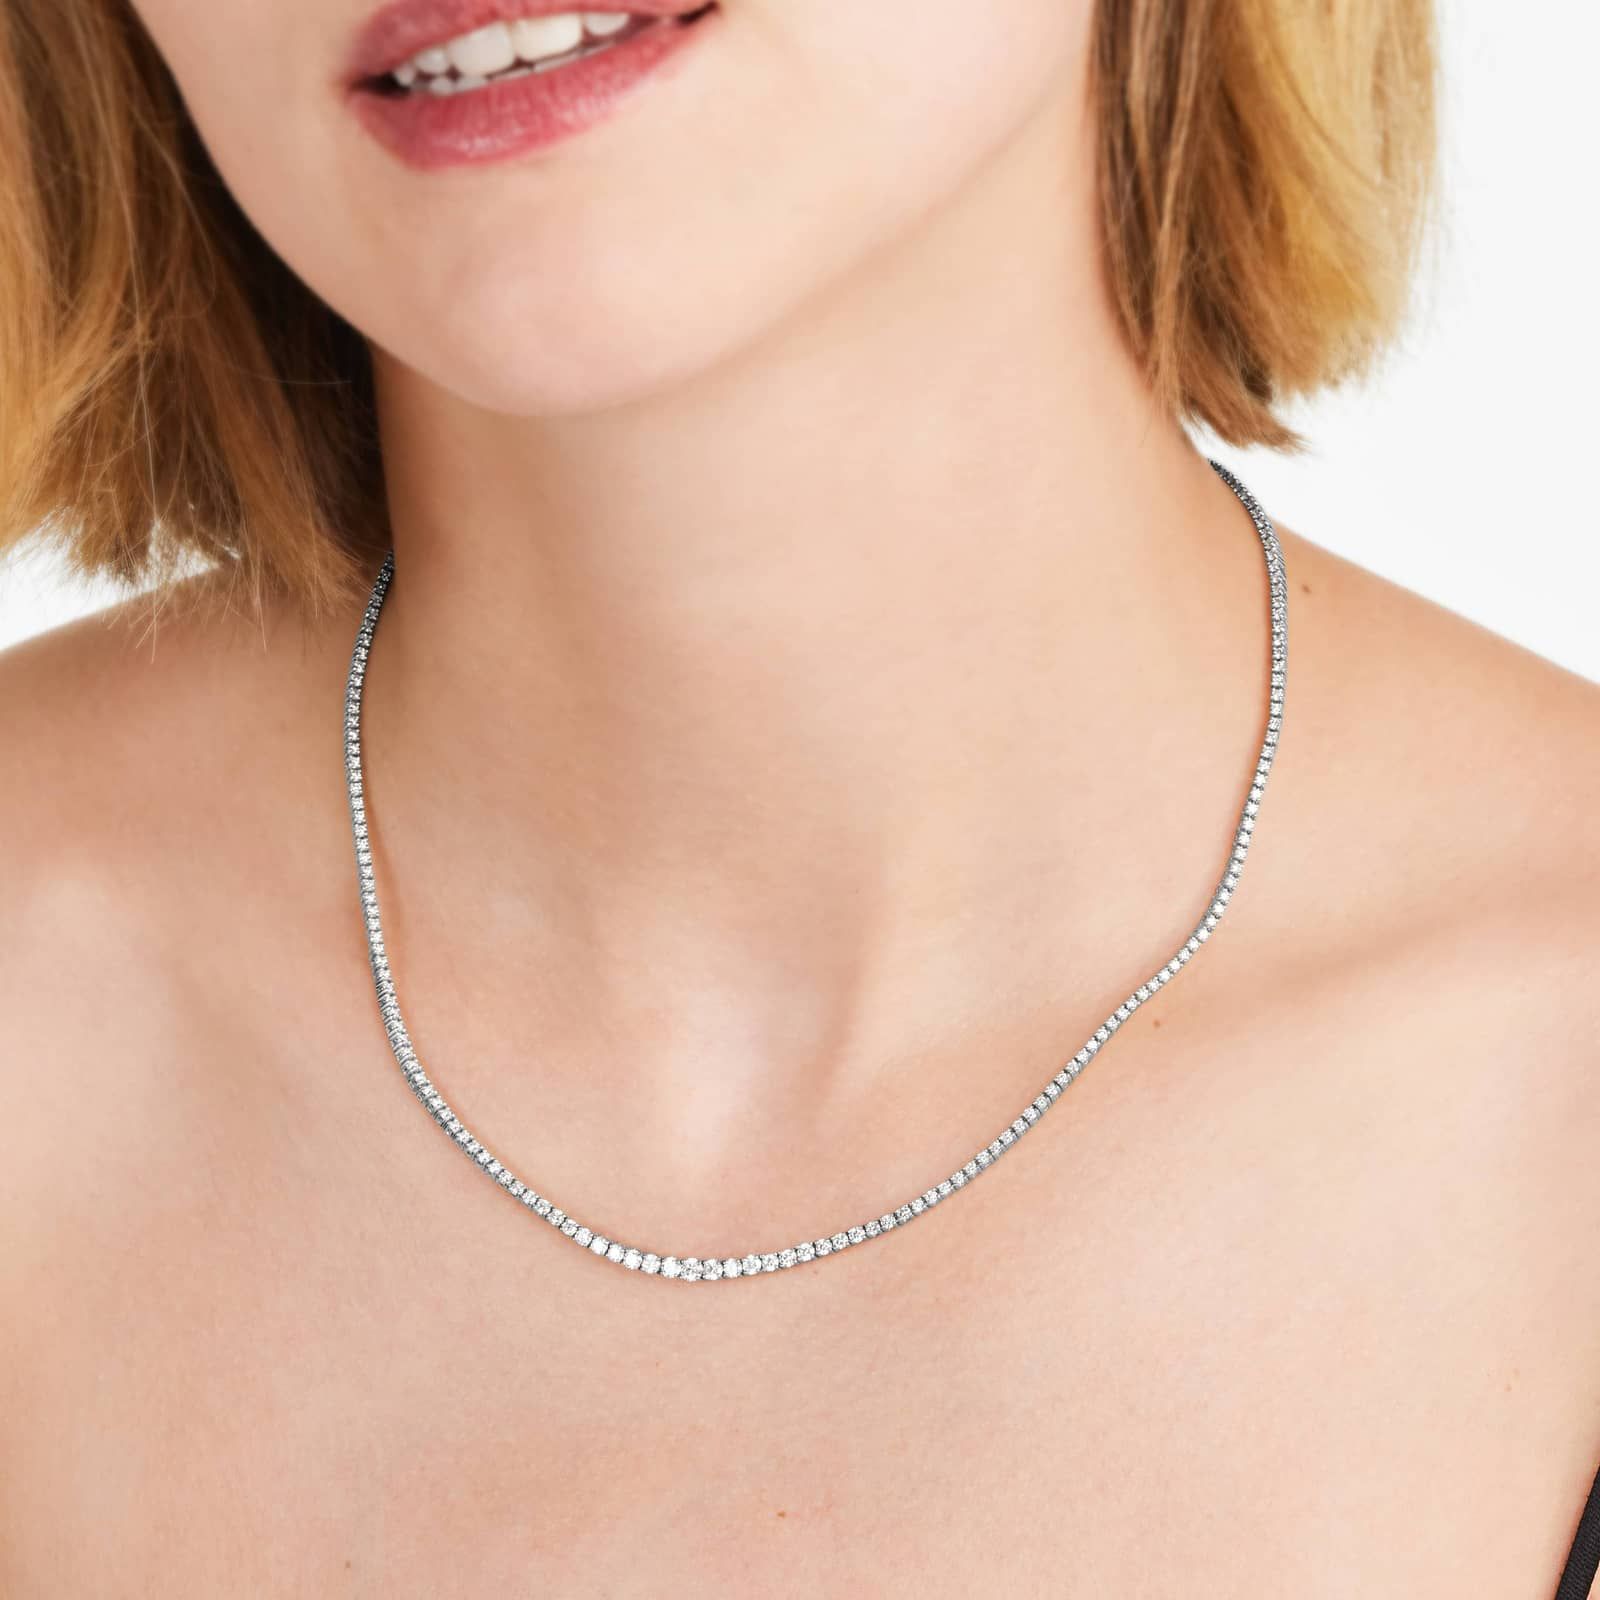 a white gold riviera tennis necklace on the woman's neck